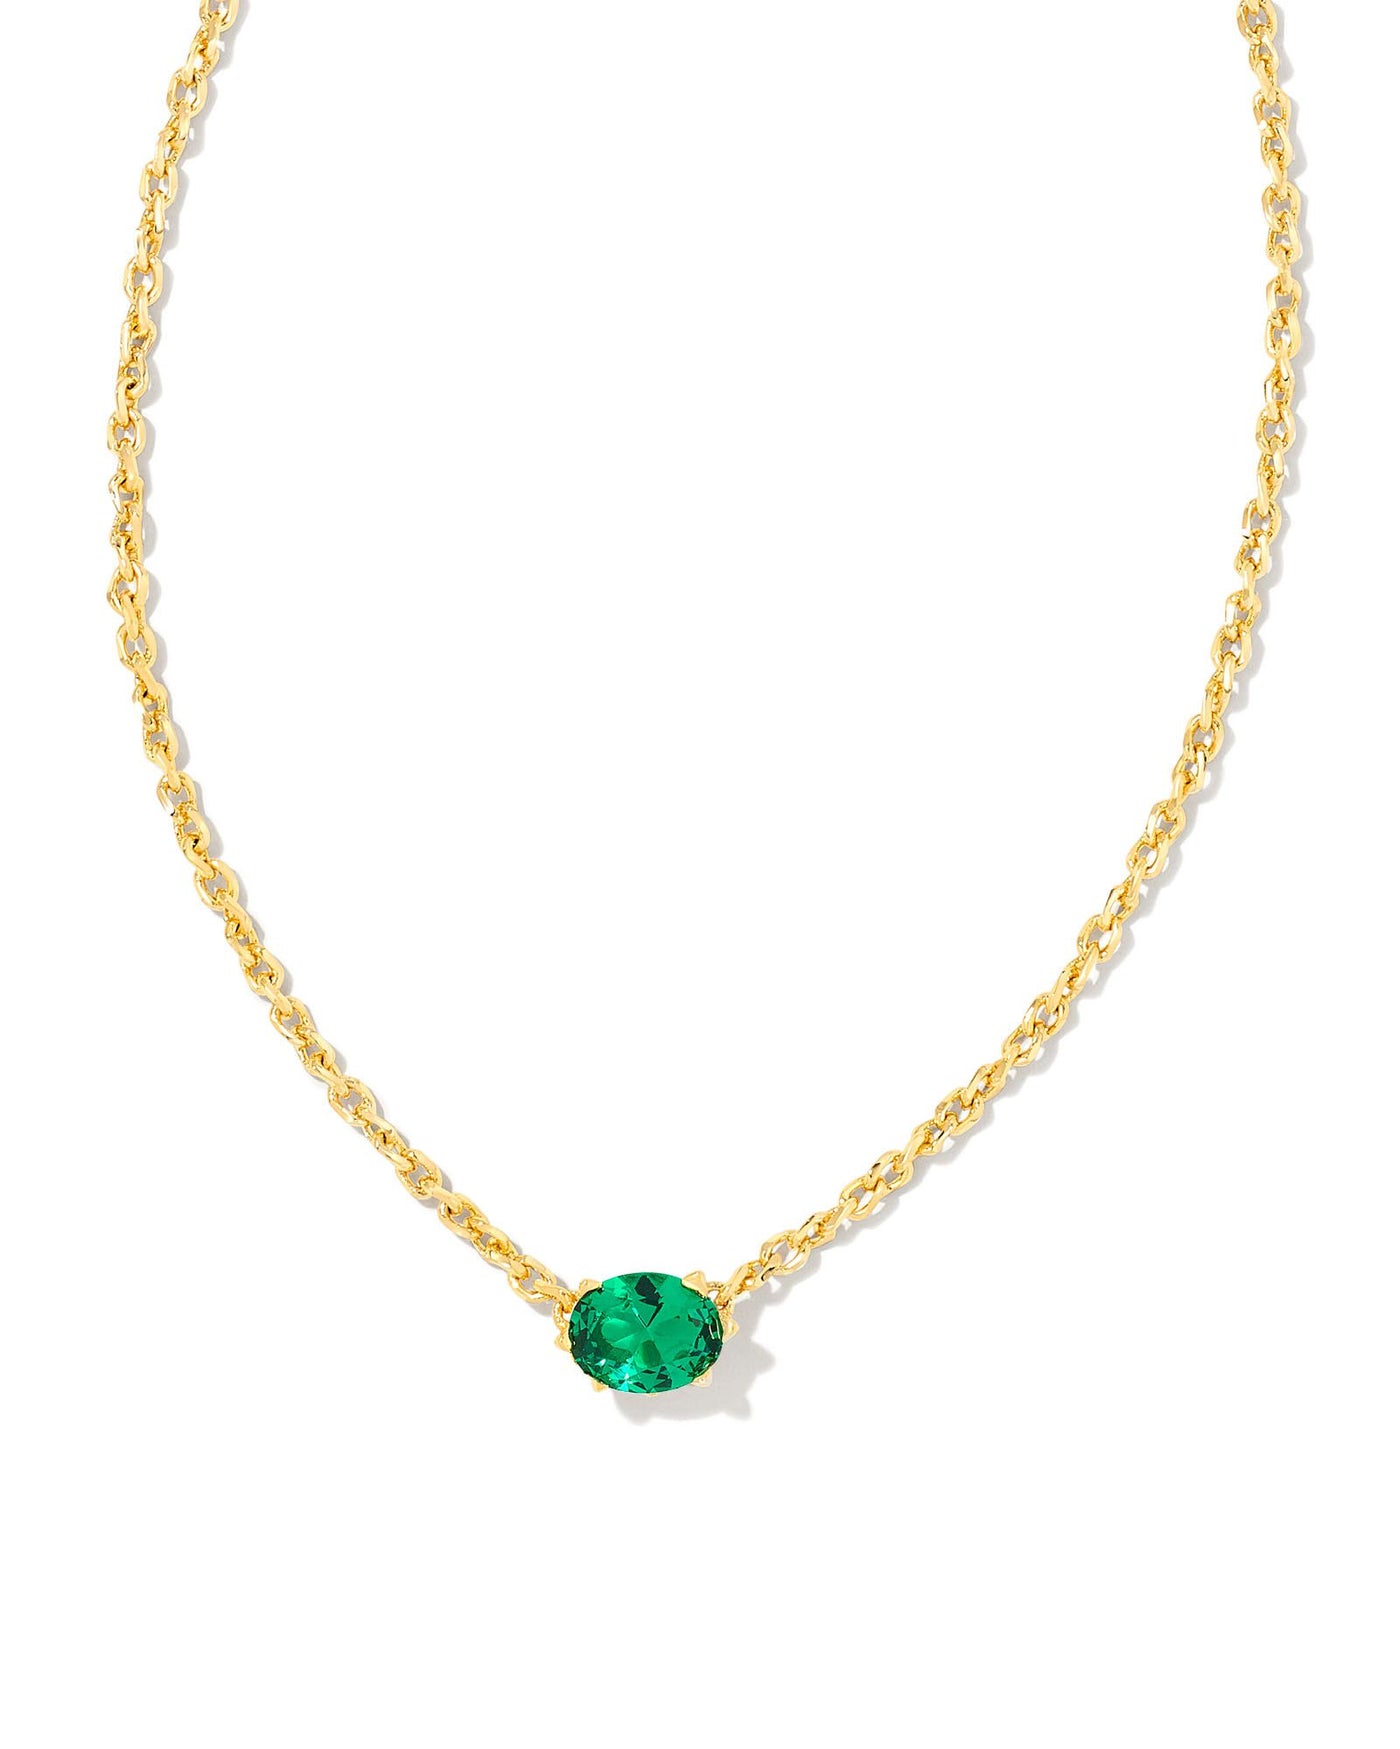 Cailin Crystal Pendant Necklace Gold Green Crystal on white background, front view.